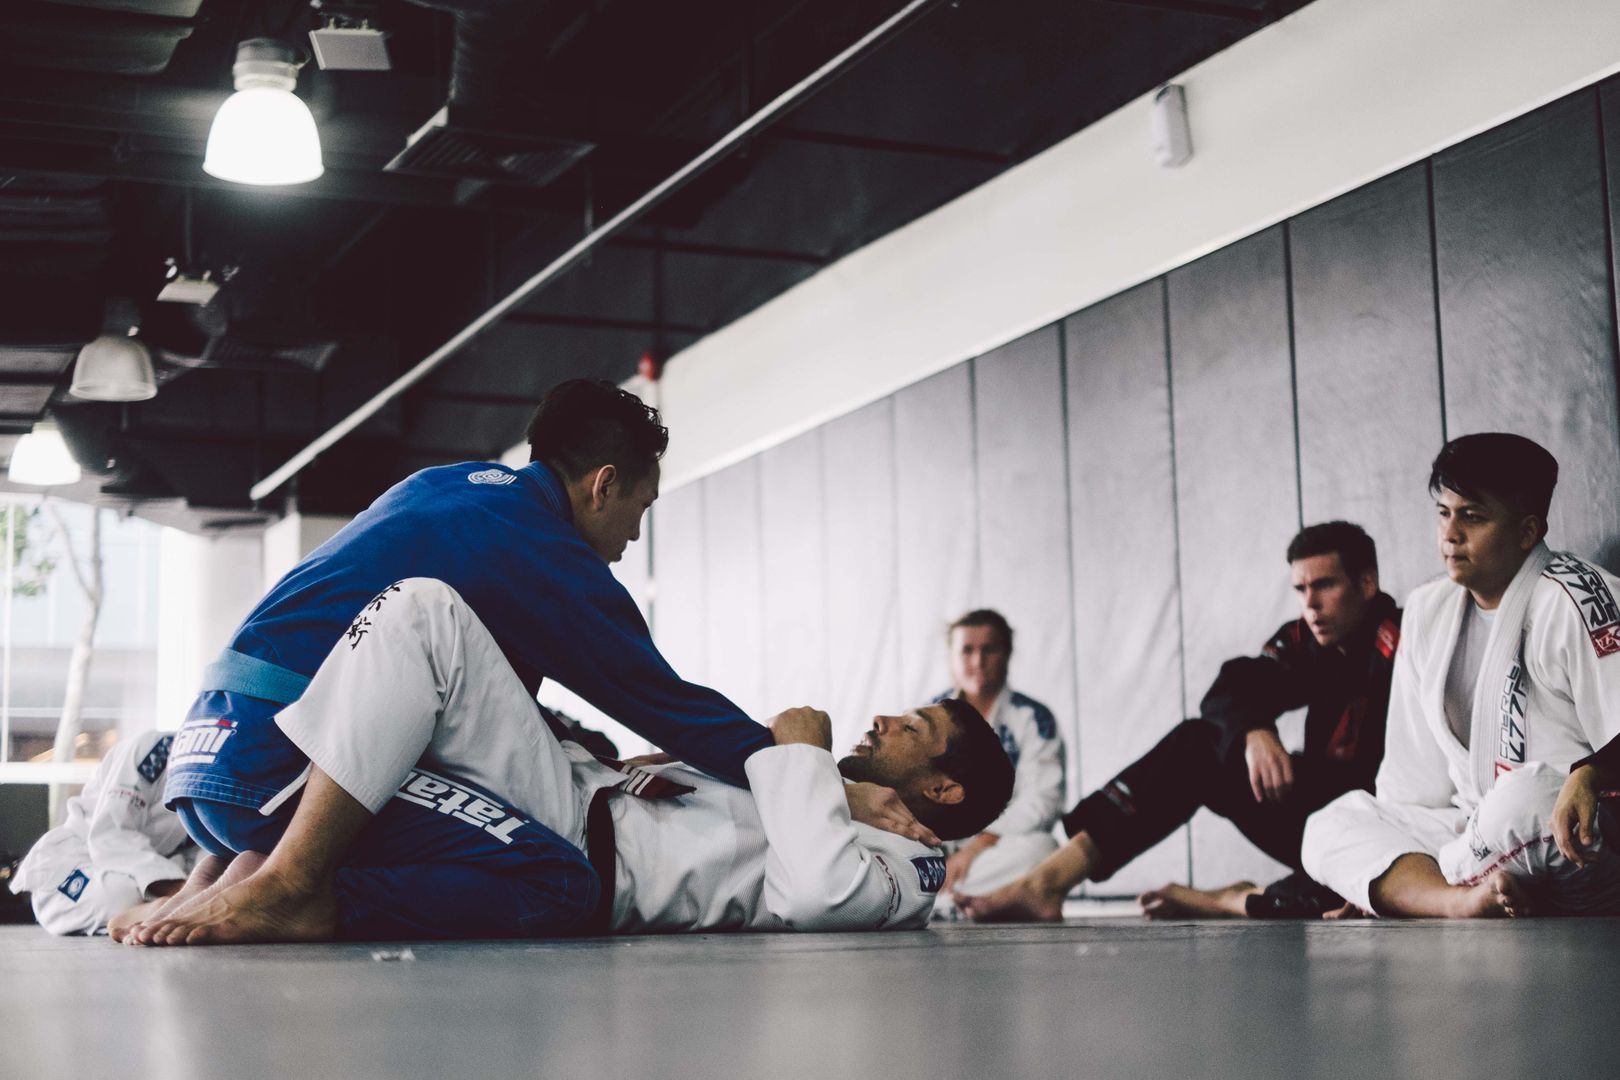 It takes a great amount of dedication and hard work to earn your BJJ black belt.